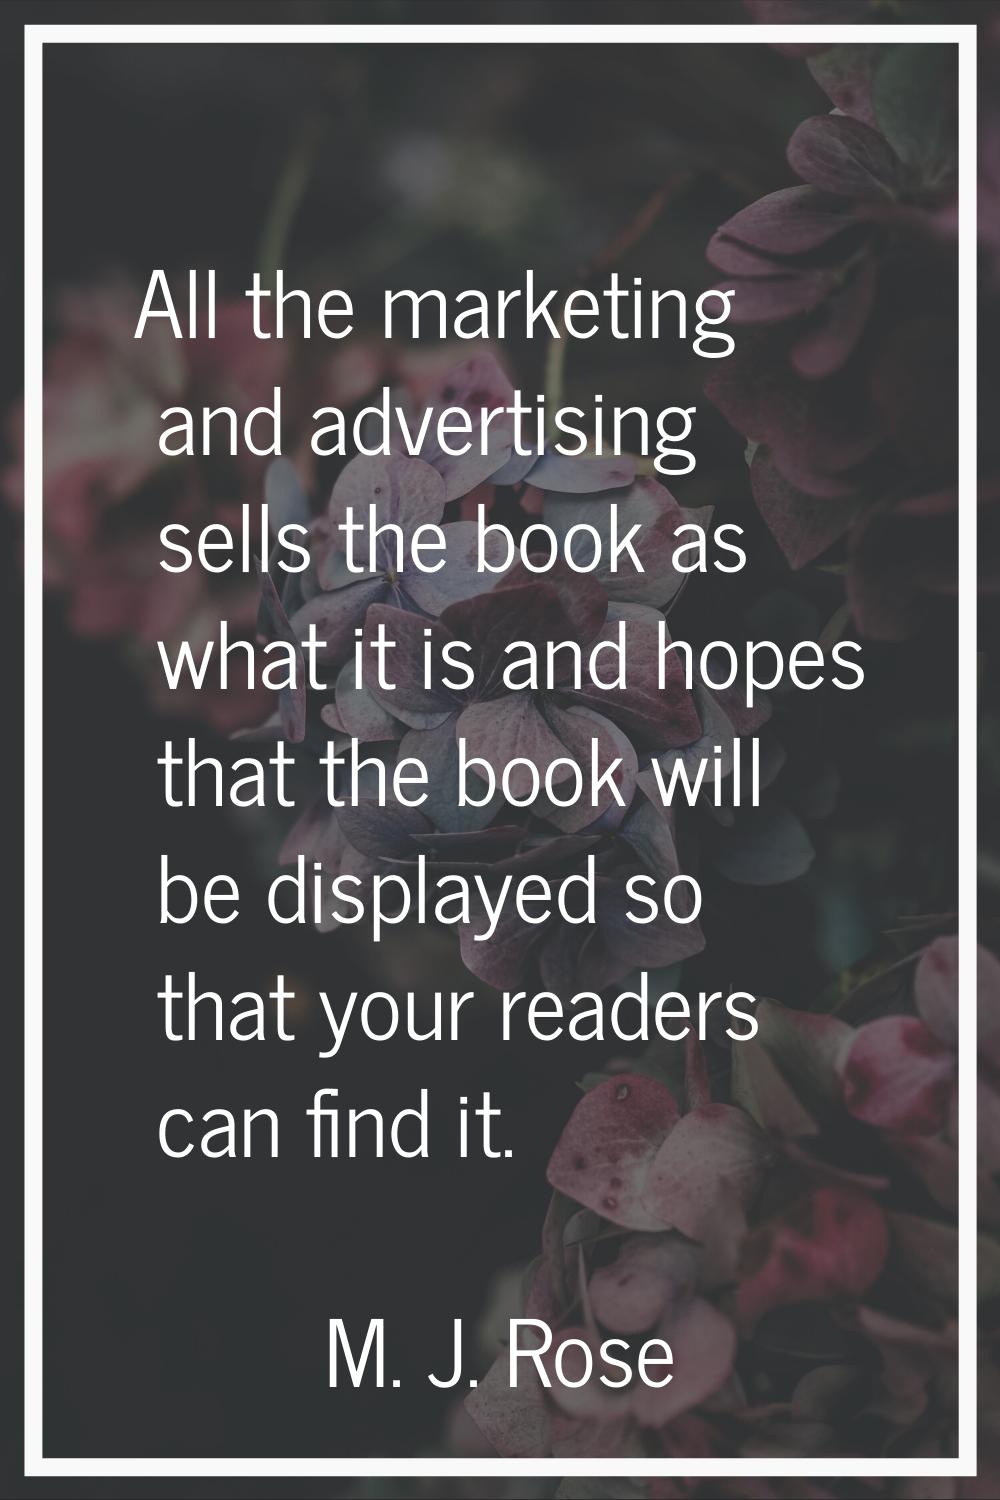 All the marketing and advertising sells the book as what it is and hopes that the book will be disp